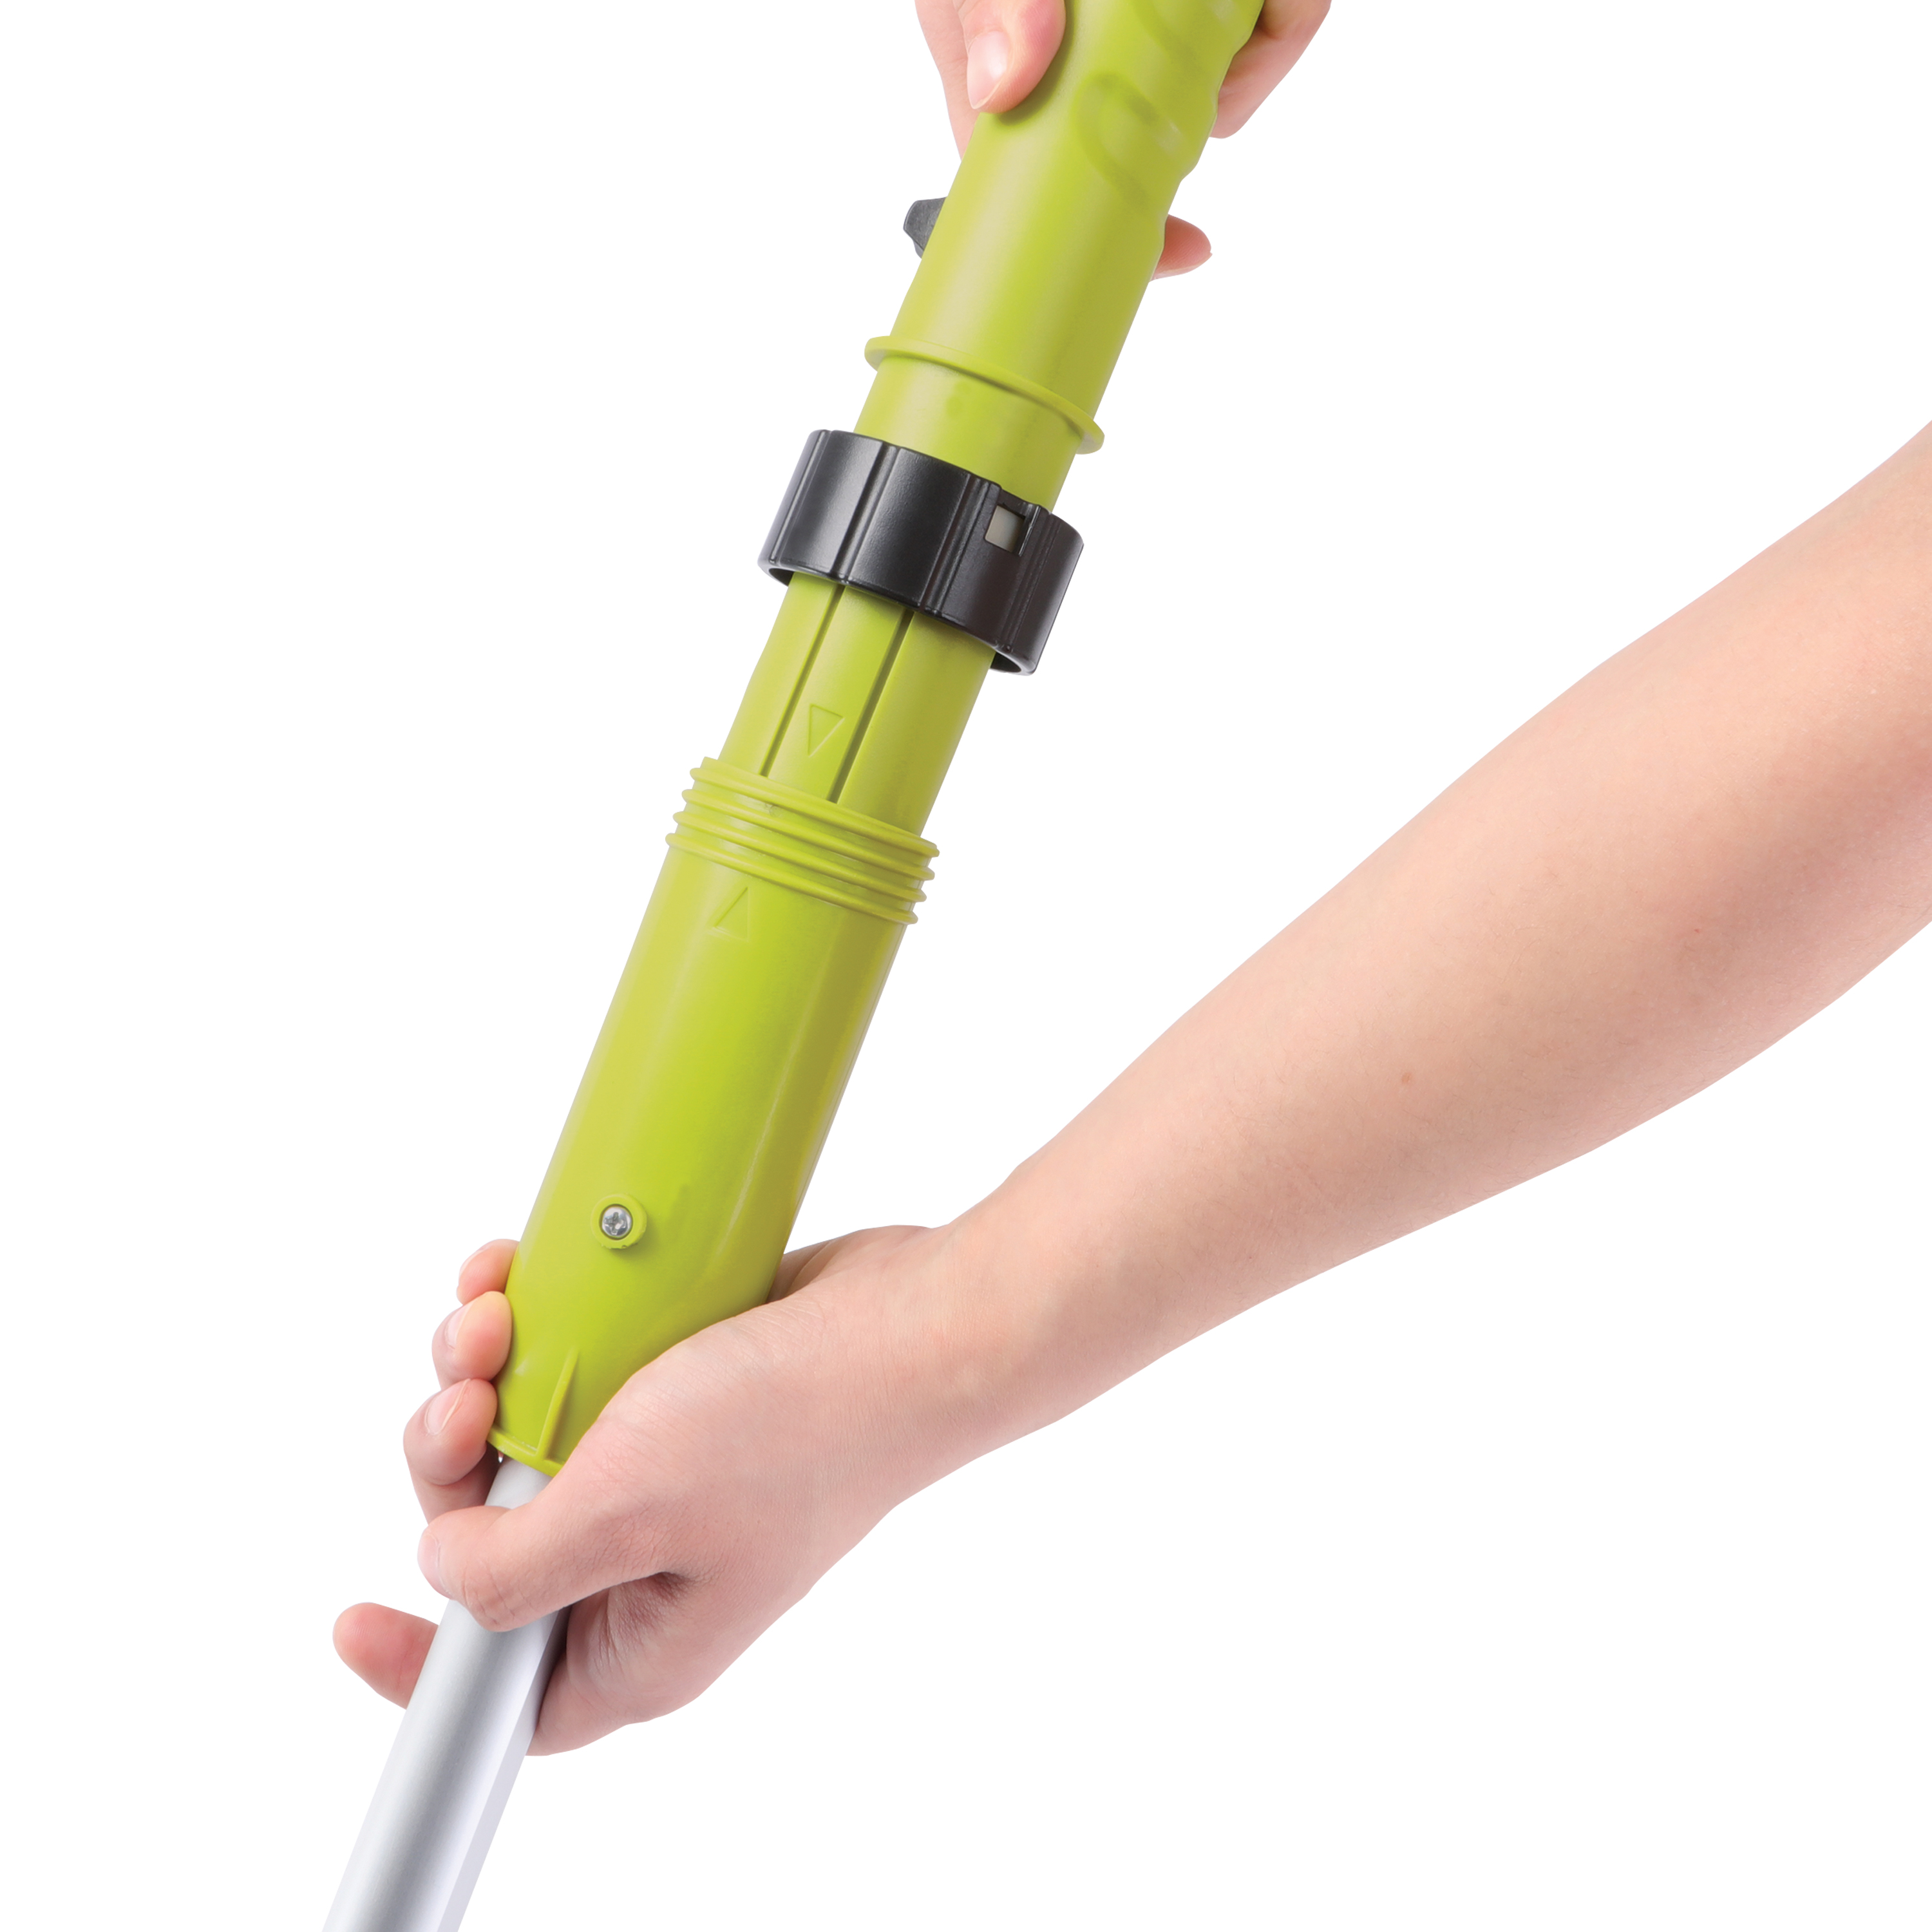 Tonchean 360° Rotary Electric Scrubber, Hand-Held Cordless, with 7